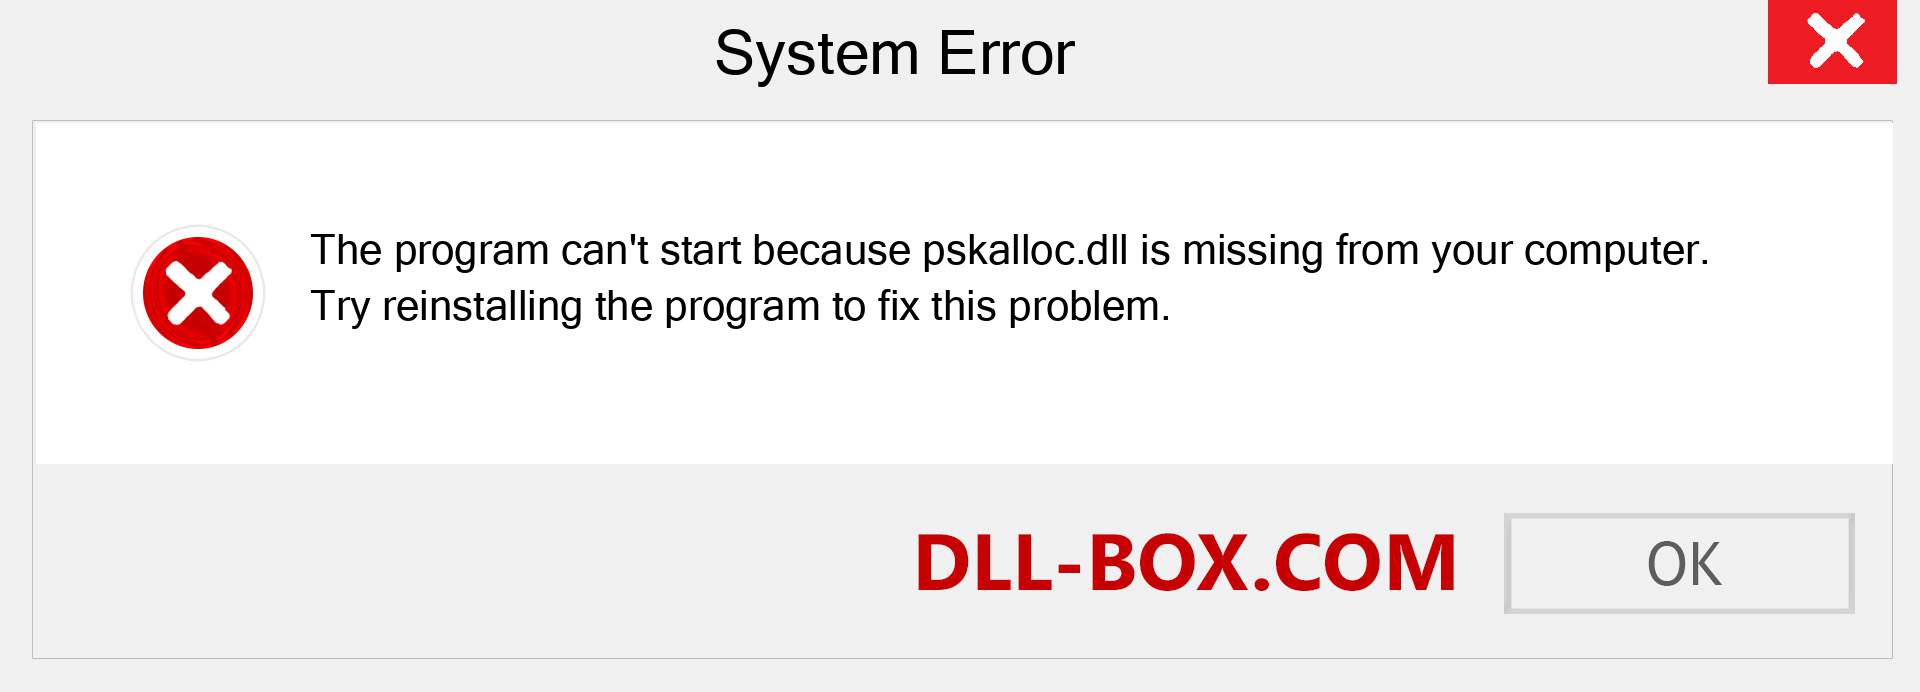  pskalloc.dll file is missing?. Download for Windows 7, 8, 10 - Fix  pskalloc dll Missing Error on Windows, photos, images